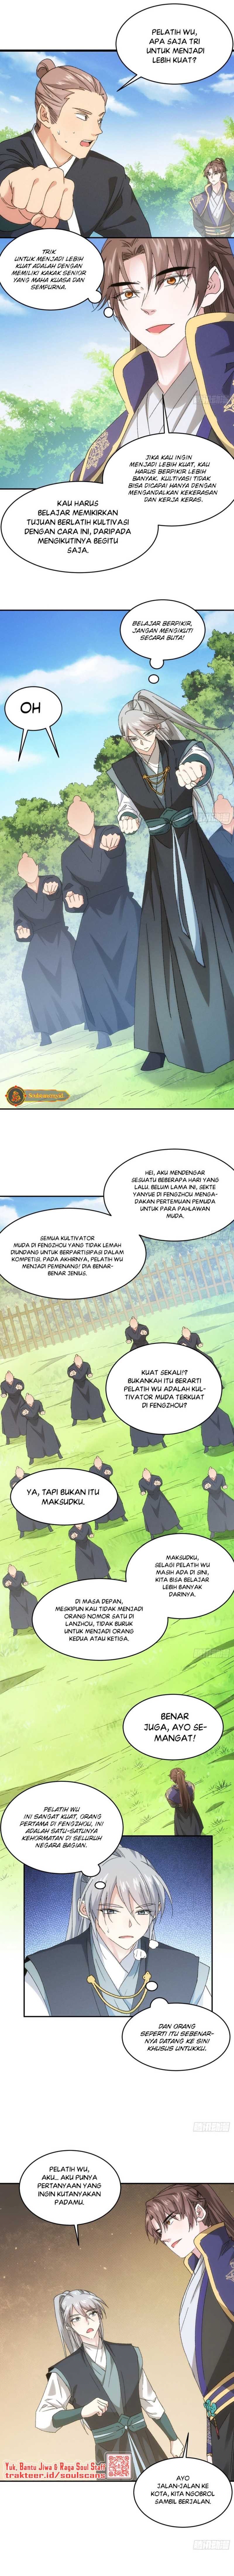 Dilarang COPAS - situs resmi www.mangacanblog.com - Komik i just dont play the card according to the routine 135 - chapter 135 136 Indonesia i just dont play the card according to the routine 135 - chapter 135 Terbaru 4|Baca Manga Komik Indonesia|Mangacan